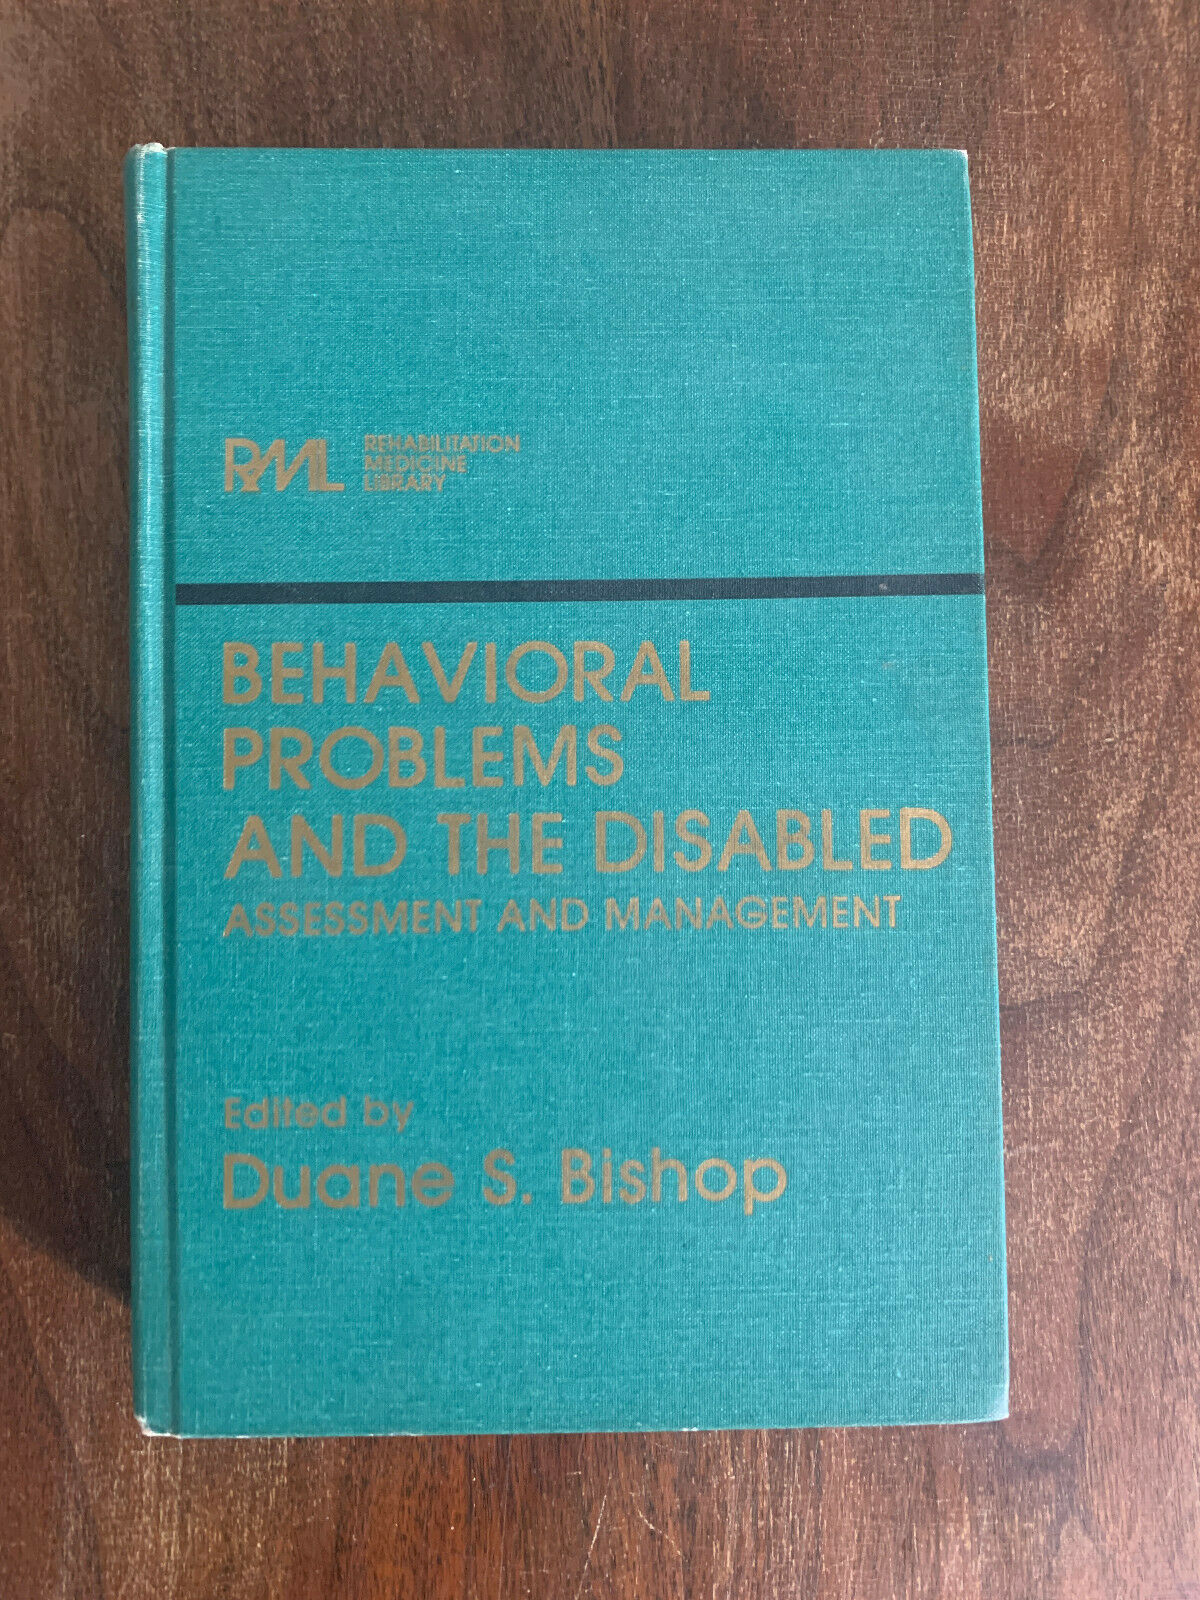 Behavioral Problems and the Disabled edited by Bishop (Z2)